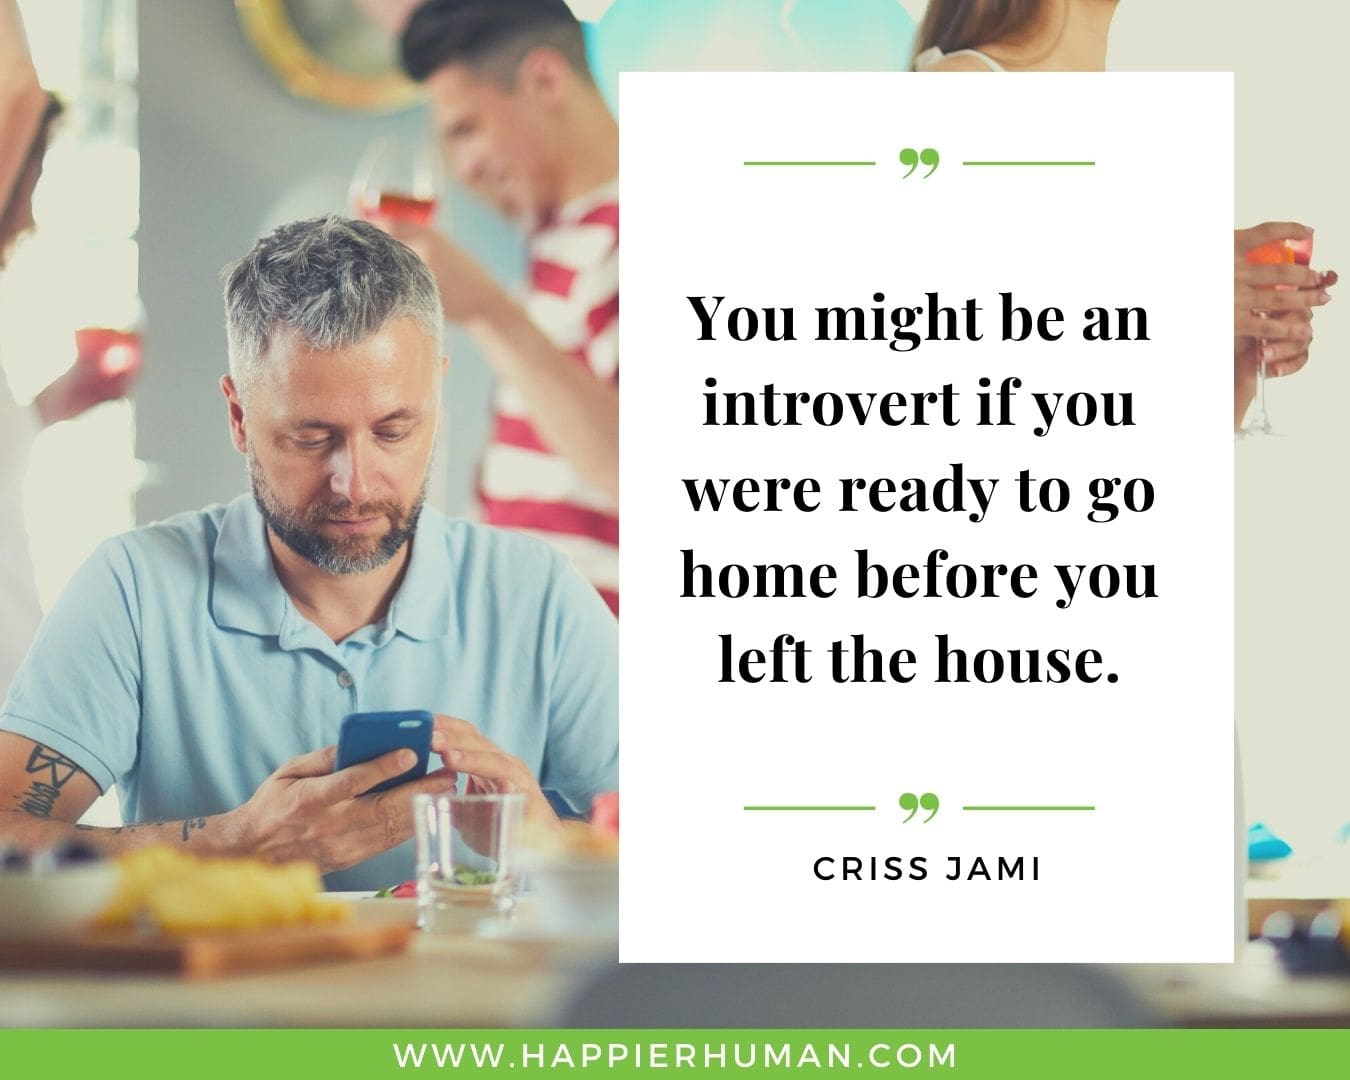 Introvert Quotes - “You might be an introvert if you were ready to go home before you left the house.” – Criss Jami